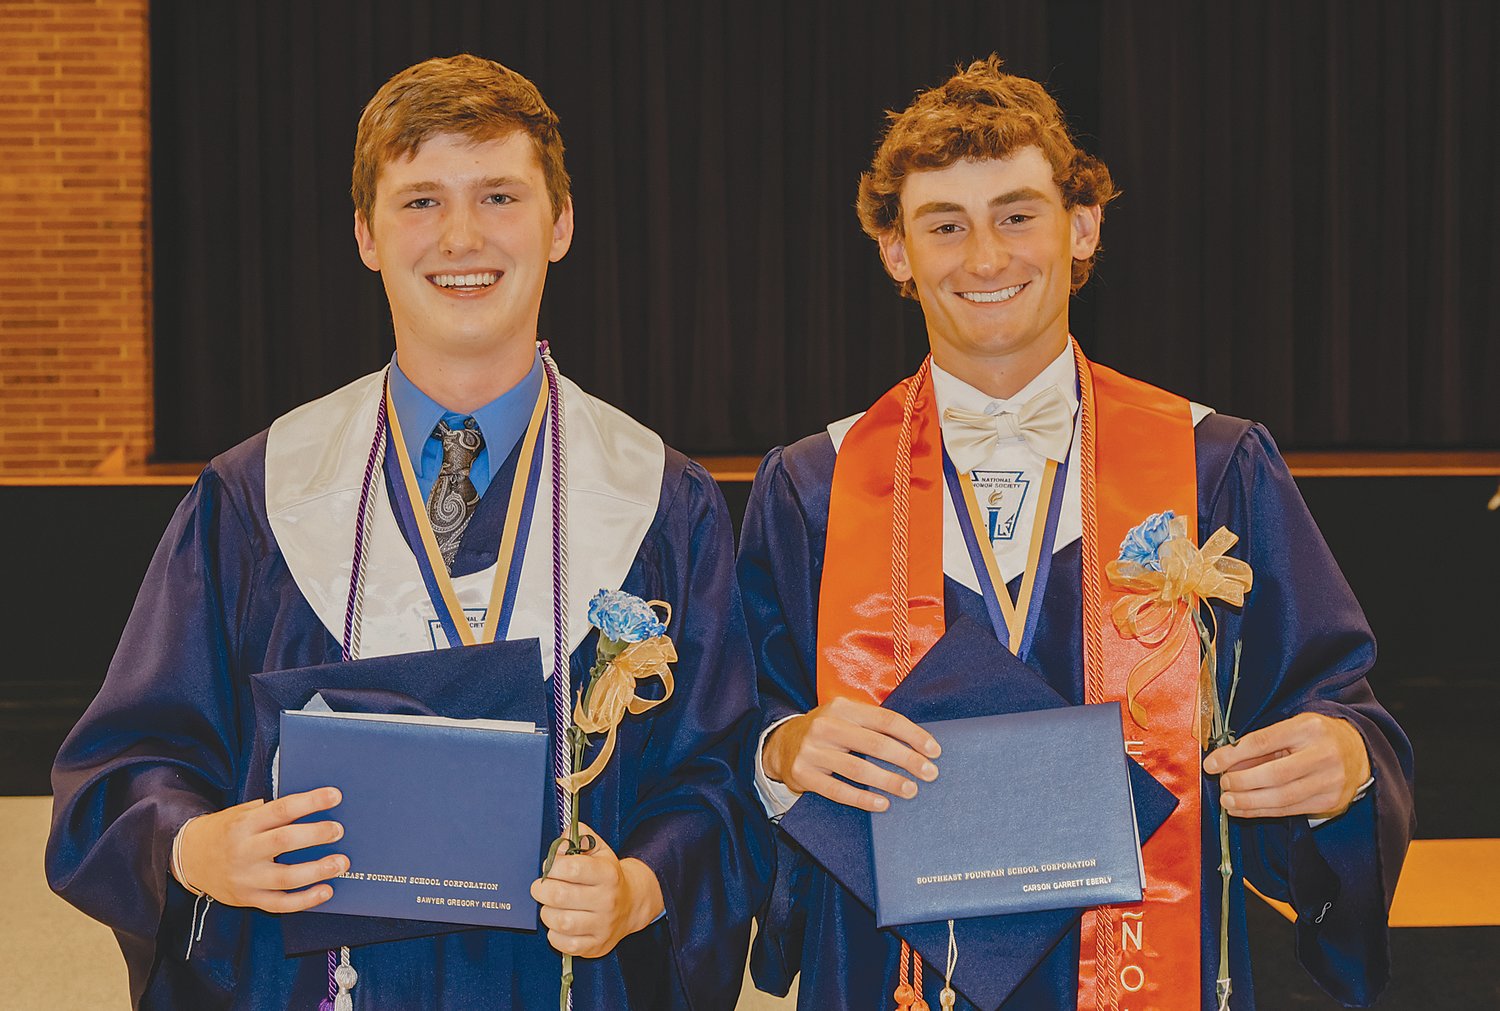 Class of 2021 salutatorian Sawyer Keeling and valedictorian Carson Eberly pose after receiving their diplomas Friday.